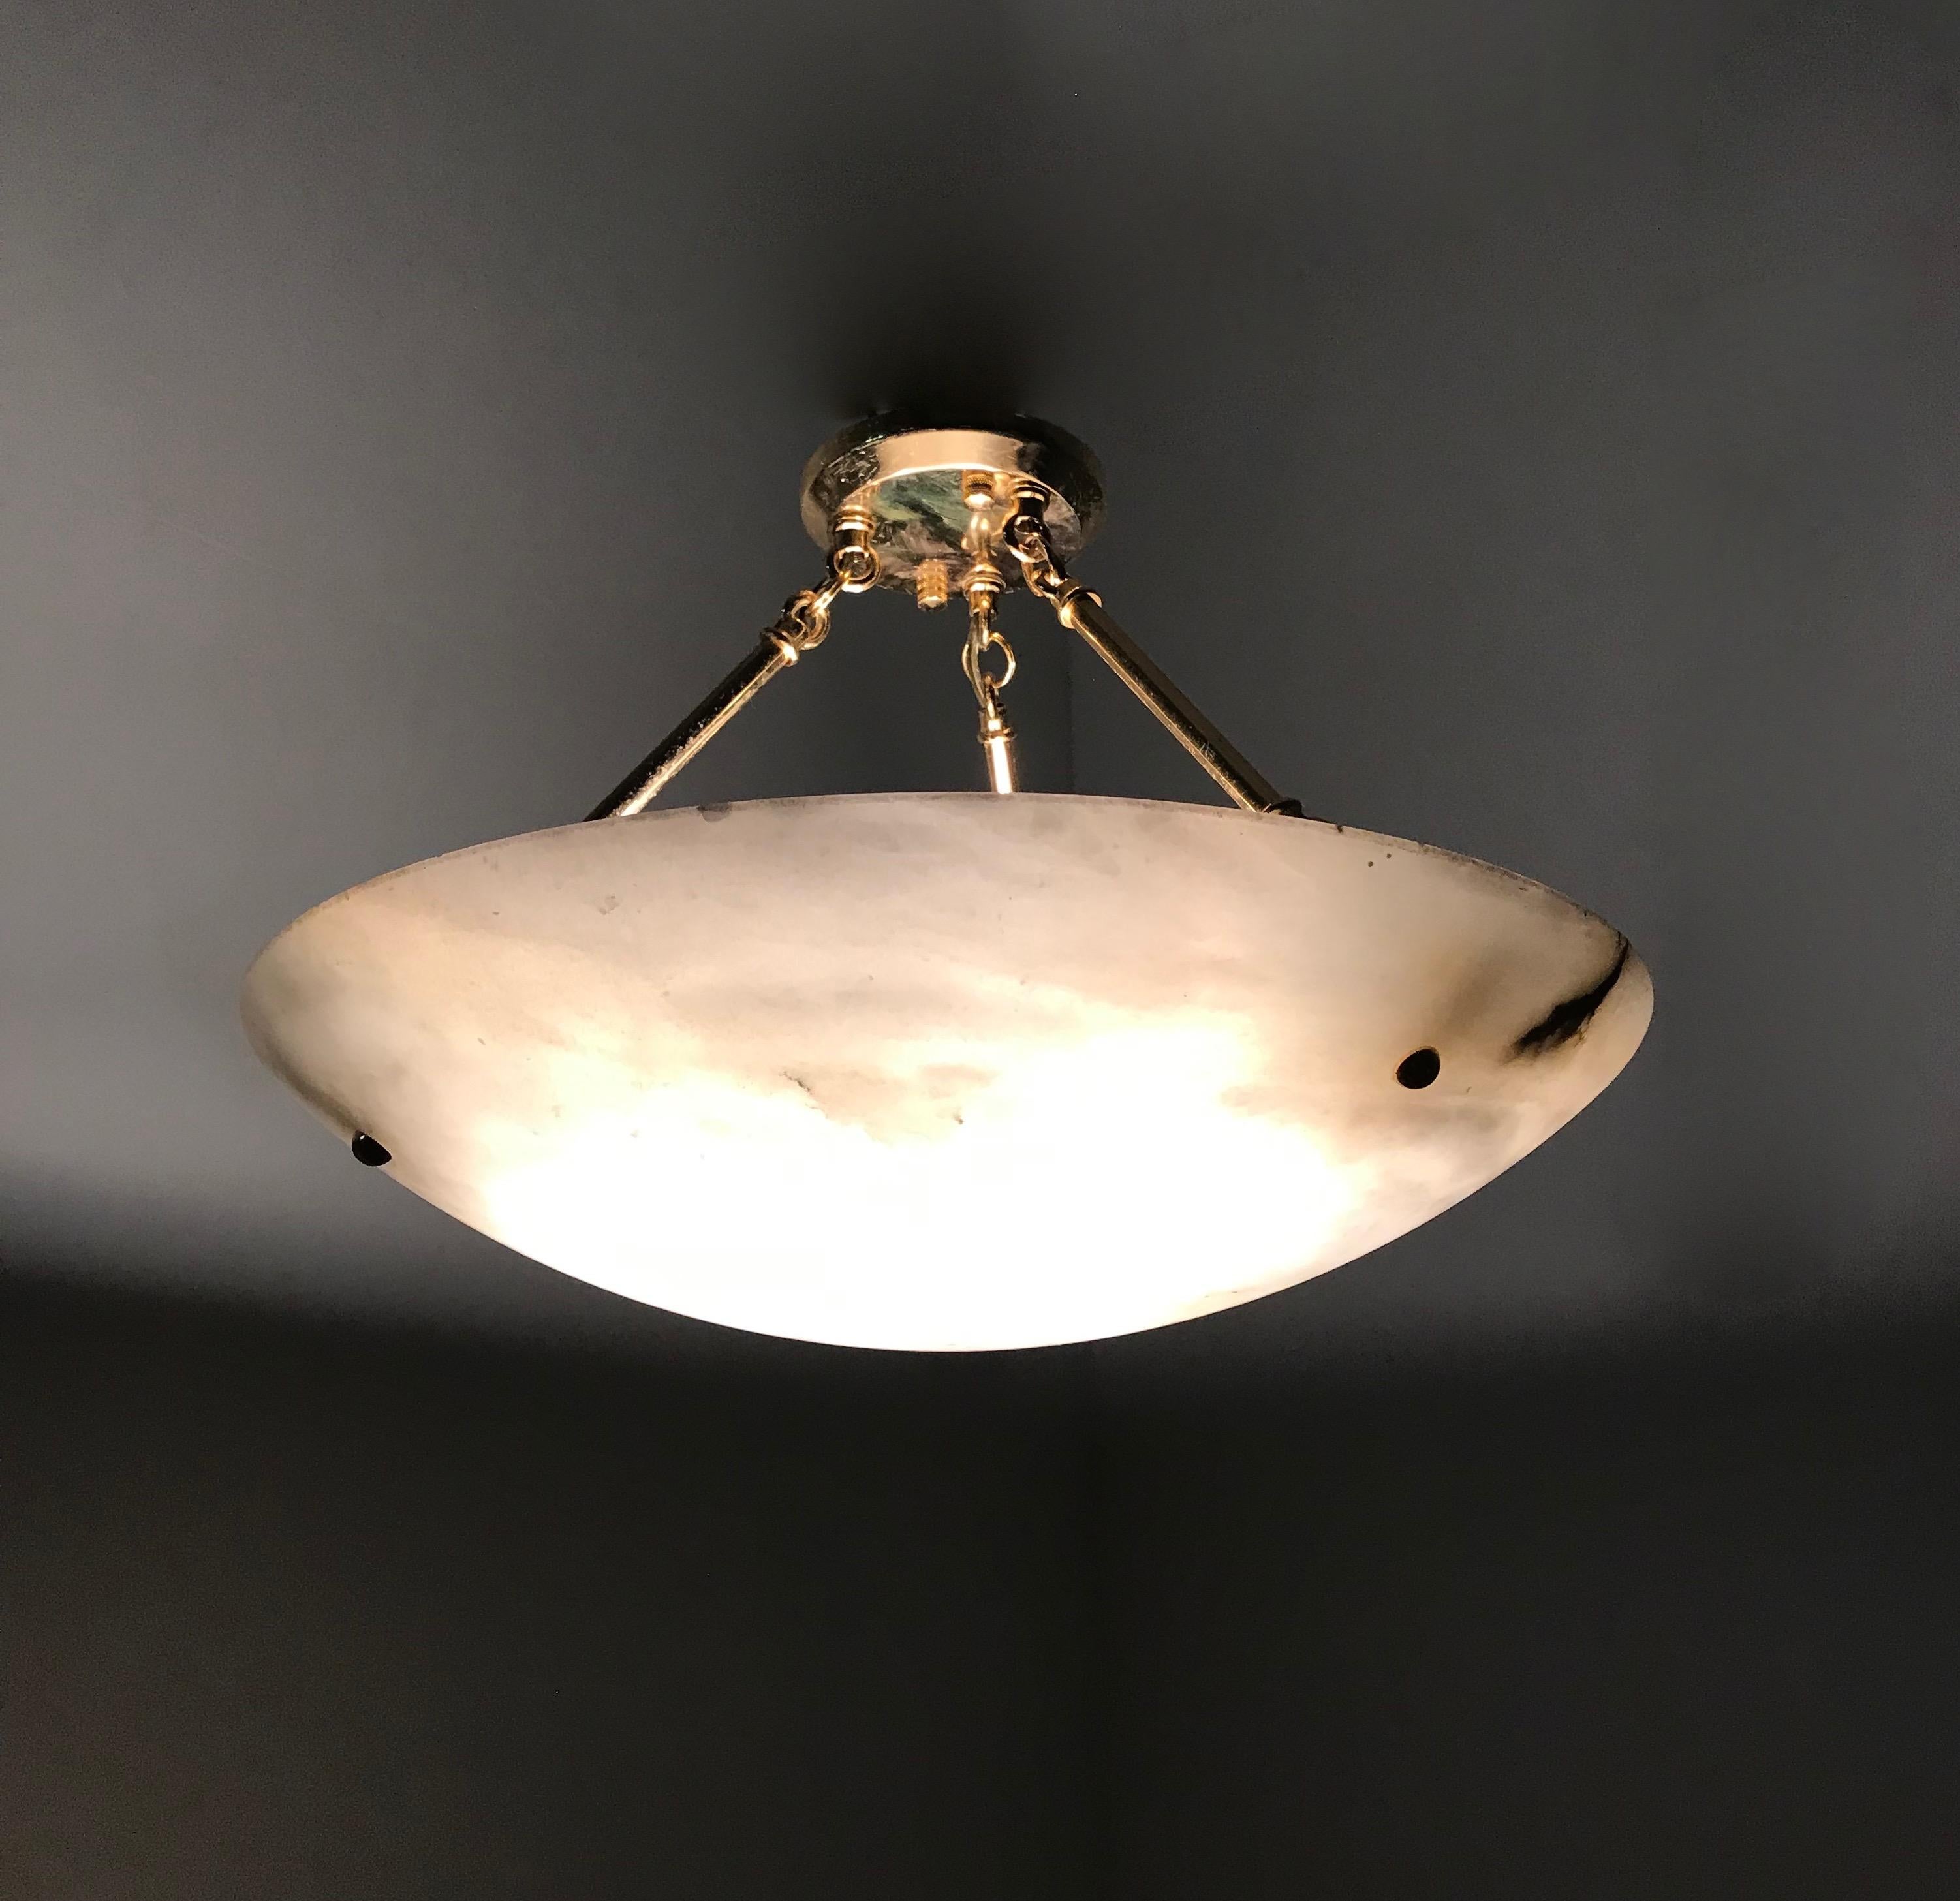 Excellent condition, Italian Art Deco style 3-light pendant.

If you like Art Deco chandeliers and pendants, but you would rather have them look like new then this 1970s alabaster shade and brass chains light fixture could be perfect for you. The